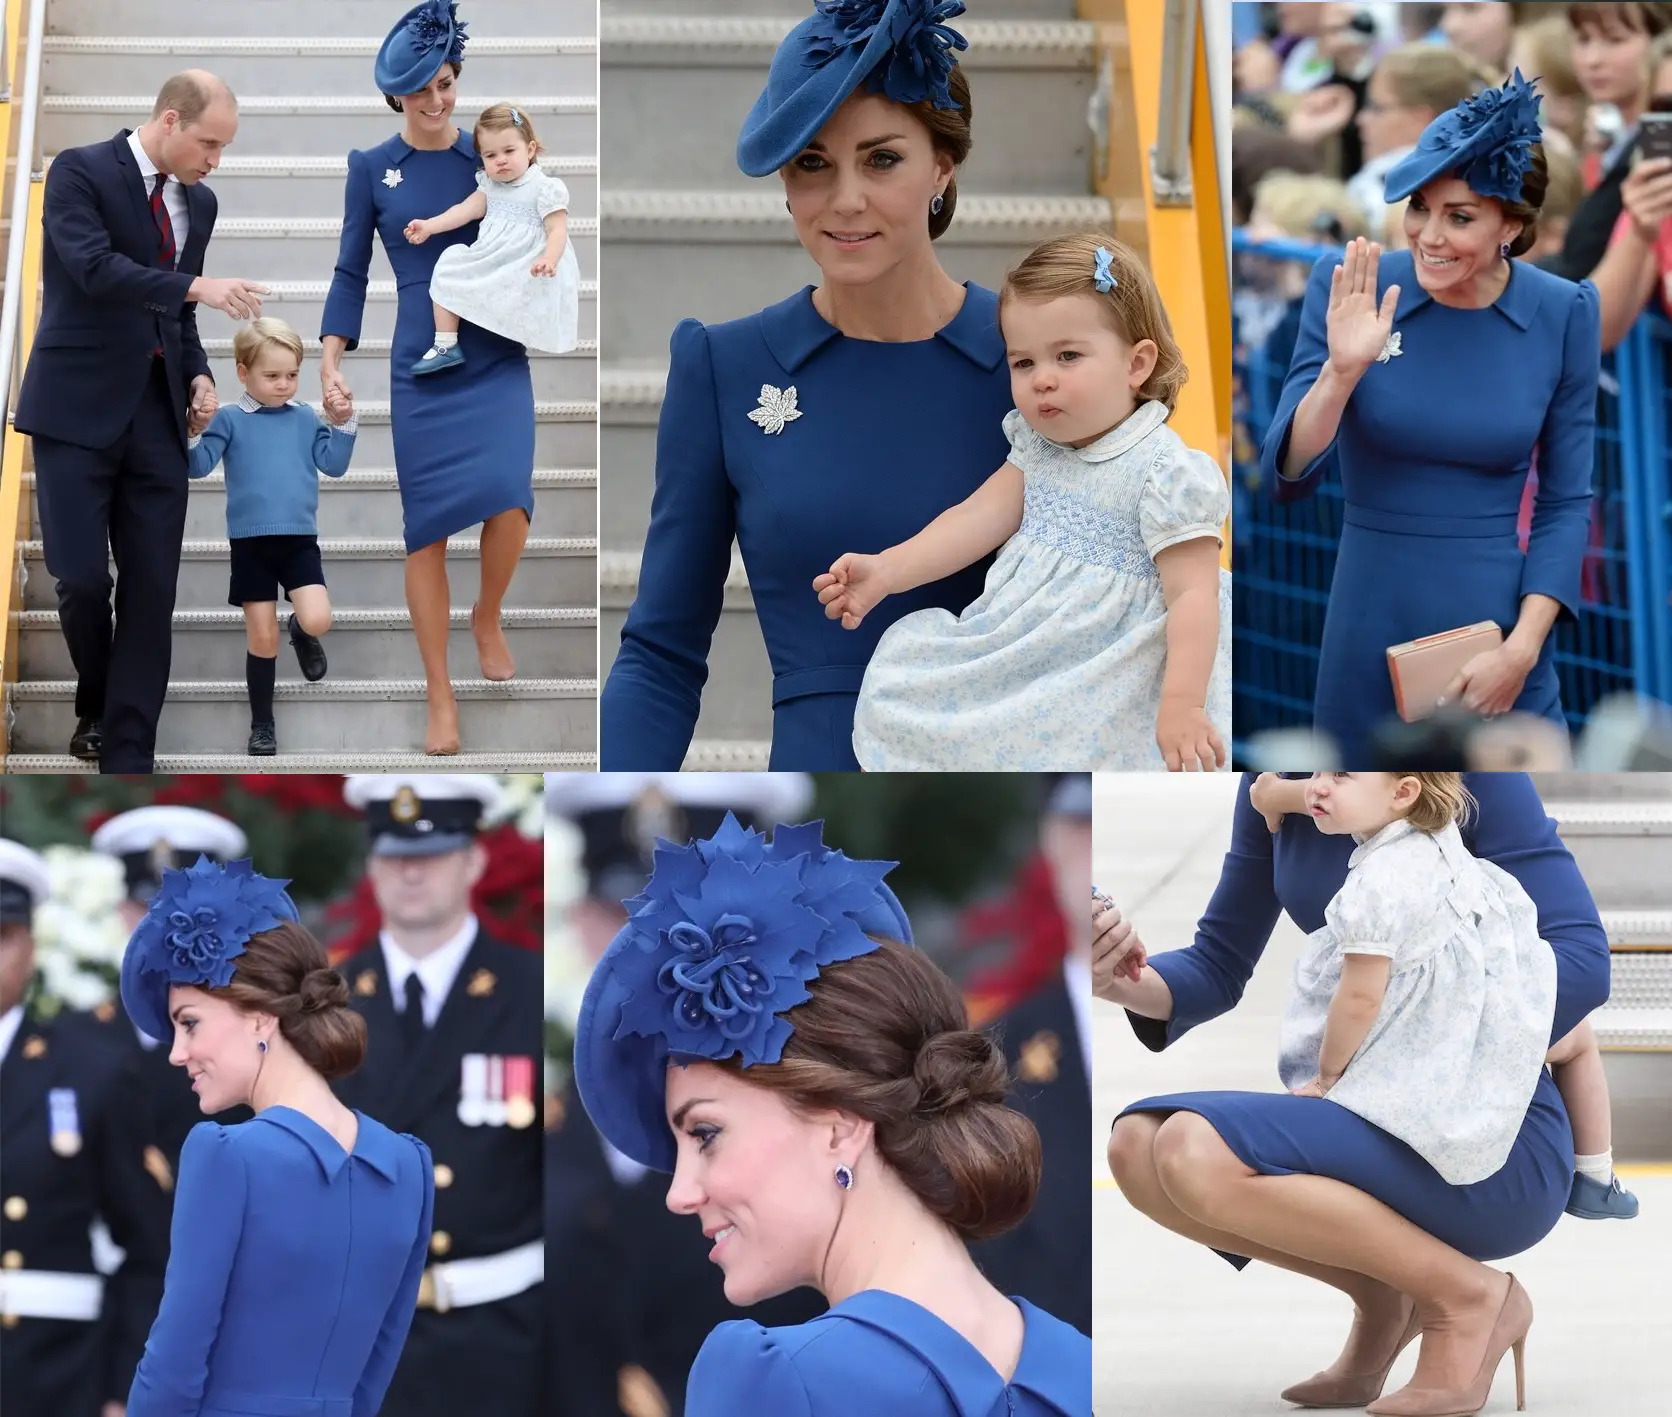 Duchess of Cambridge wore beautiful blue Jenny Packham dress when she arrived in Canada in 2016